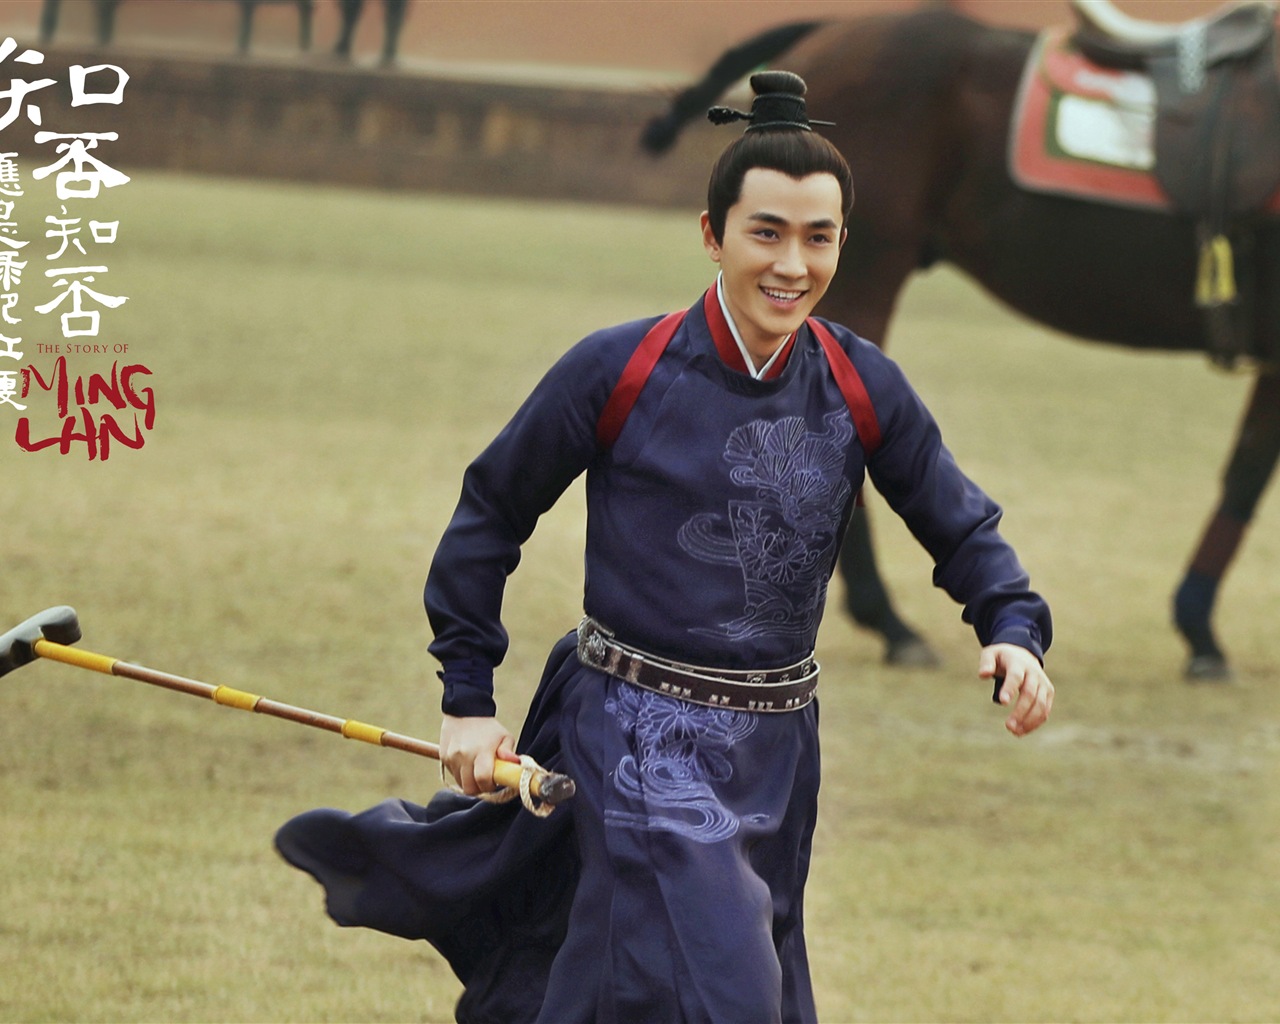 The Story Of MingLan, TV series HD wallpapers #25 - 1280x1024